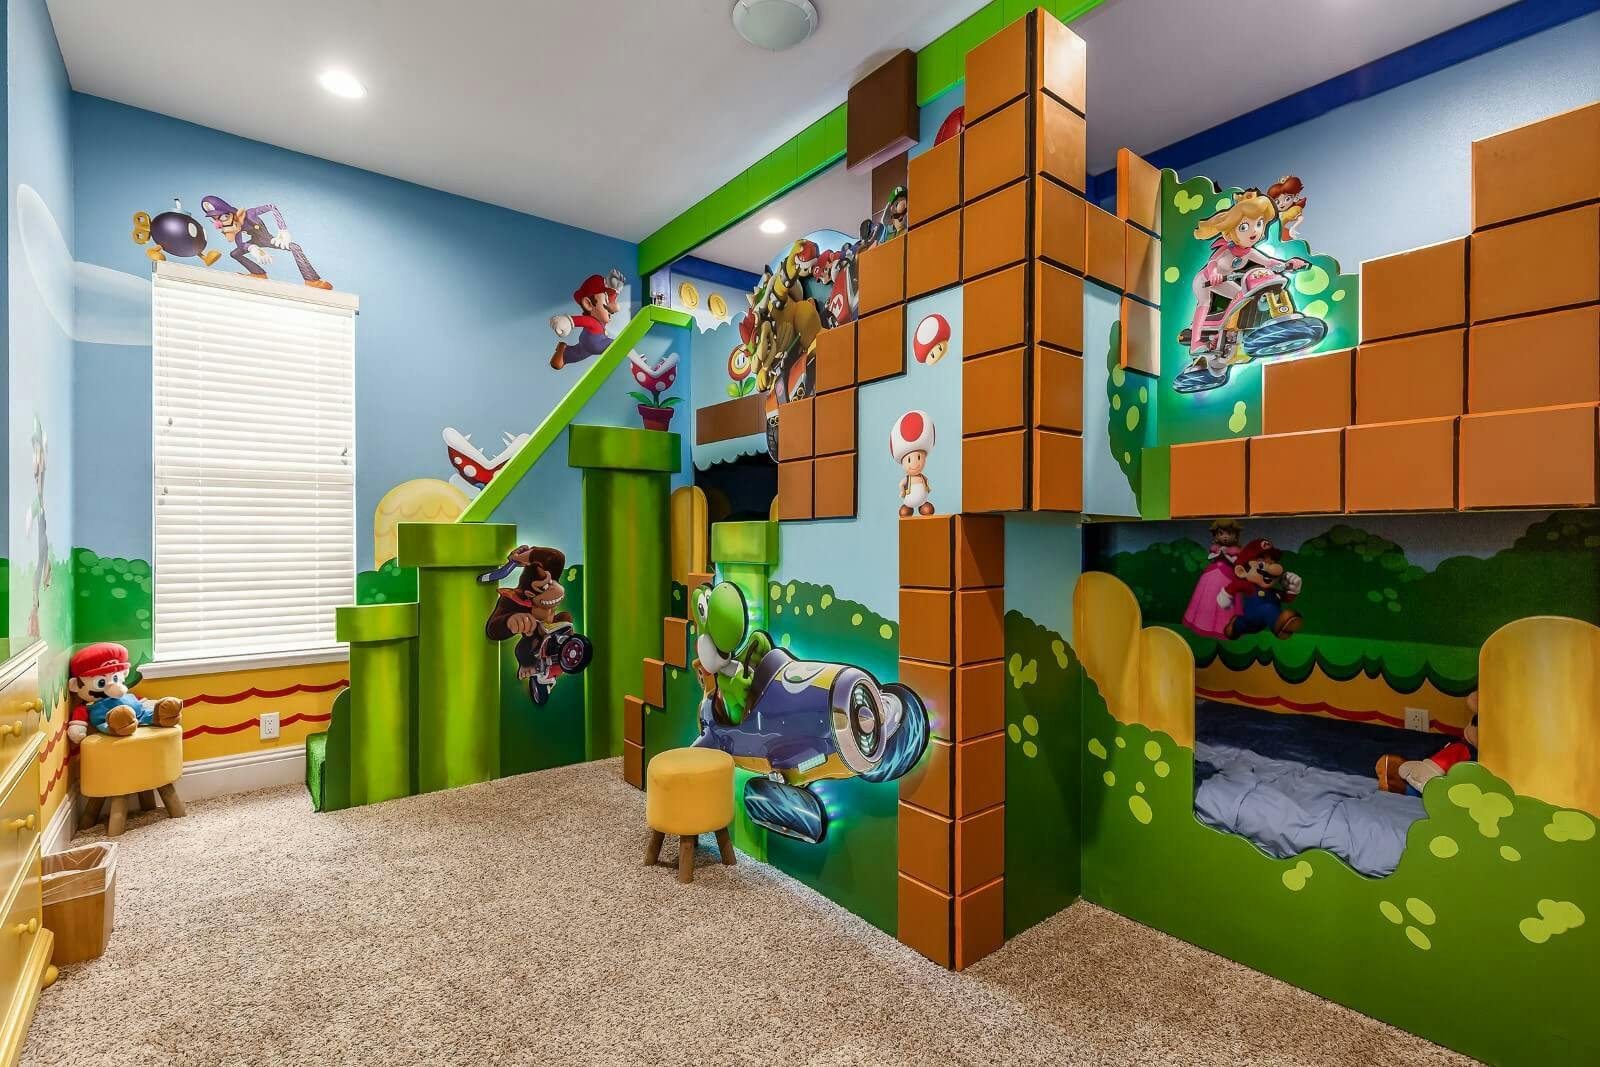 Super Mario themed bedroom with bunkbeds, slides and decorated walls